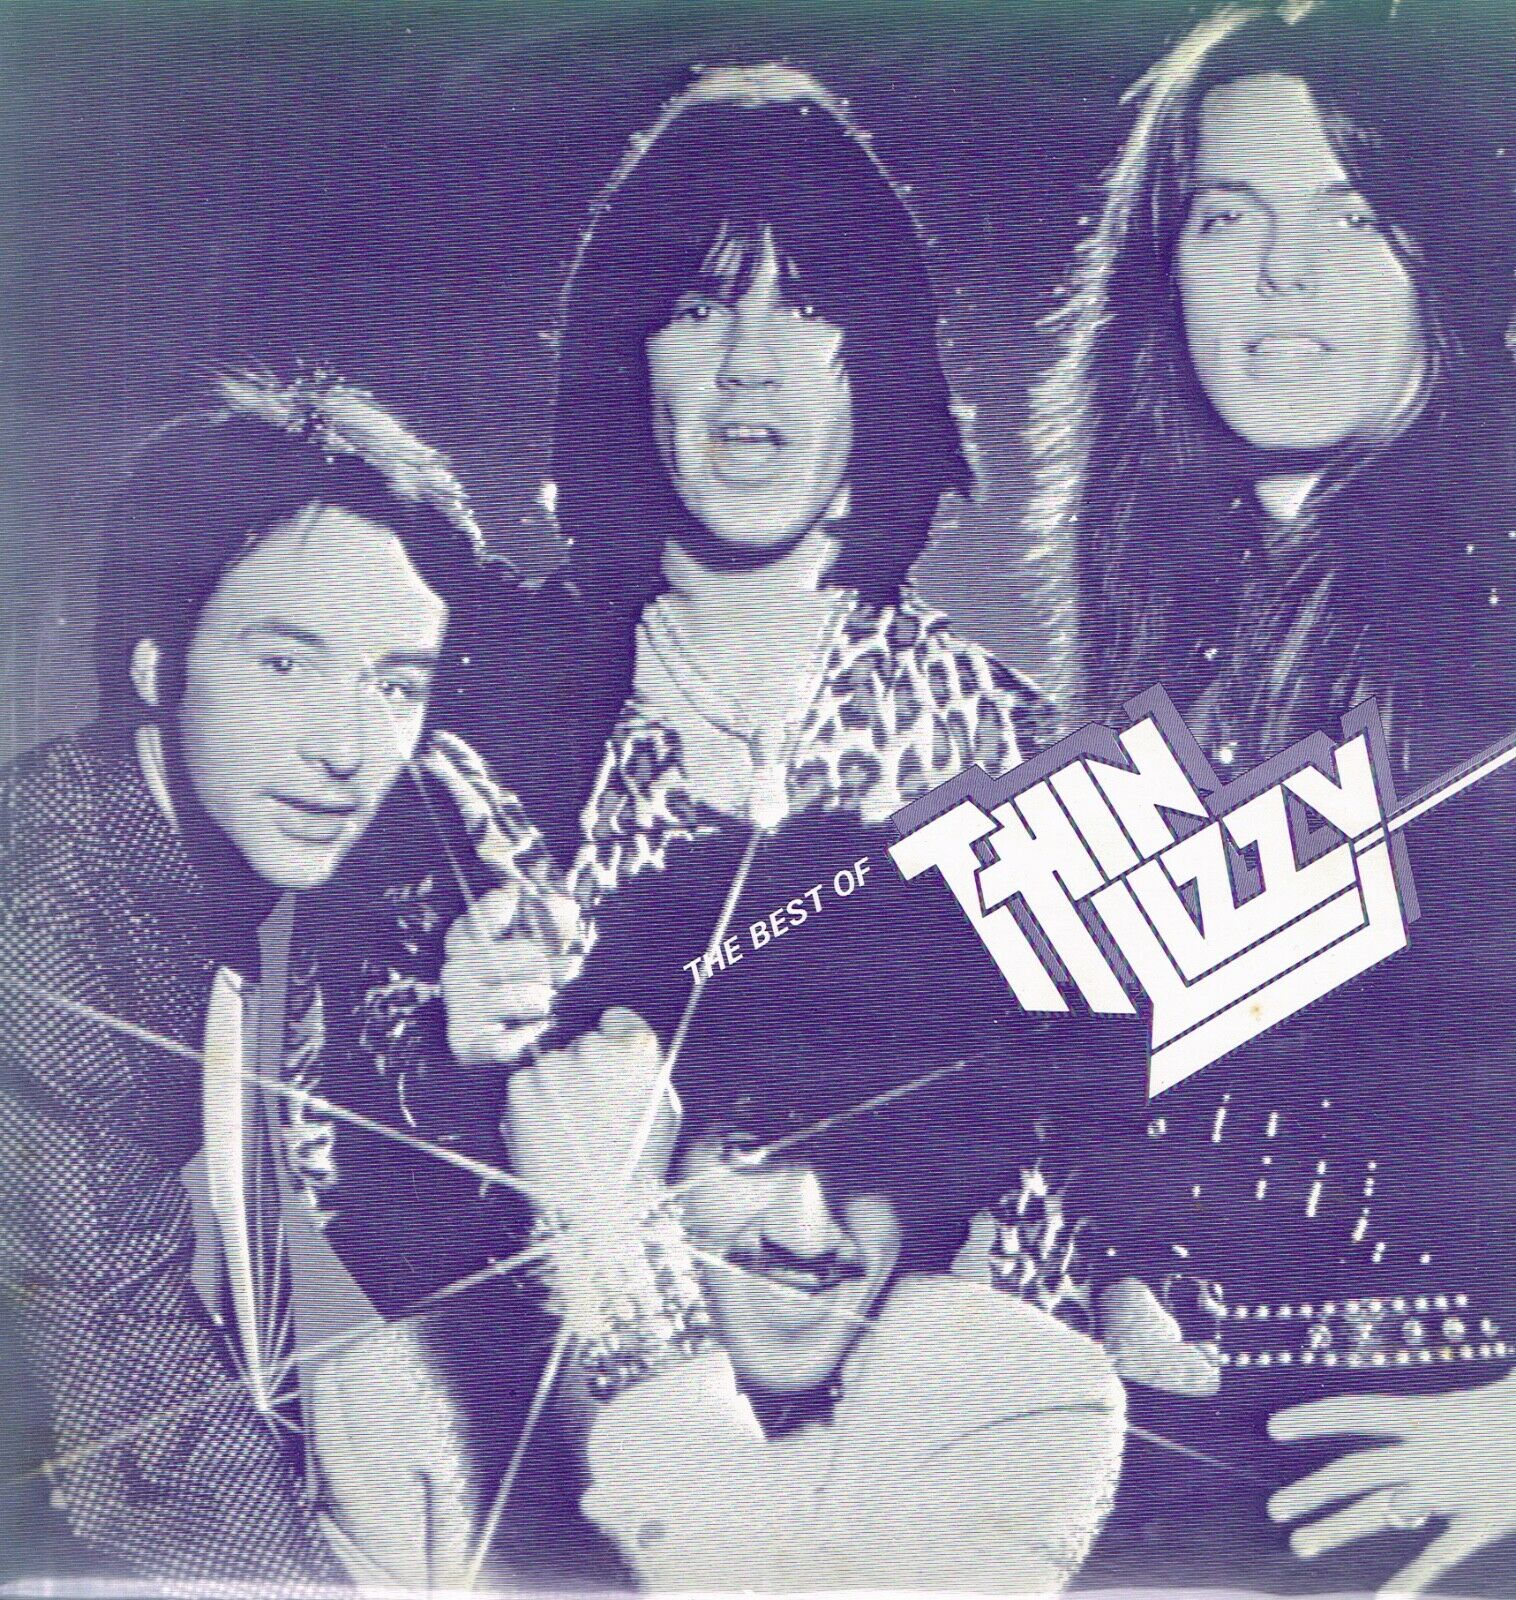 popsike.com - THIN LIZZY - THE BEST OF THIN LIZZY (SNP89) RARE